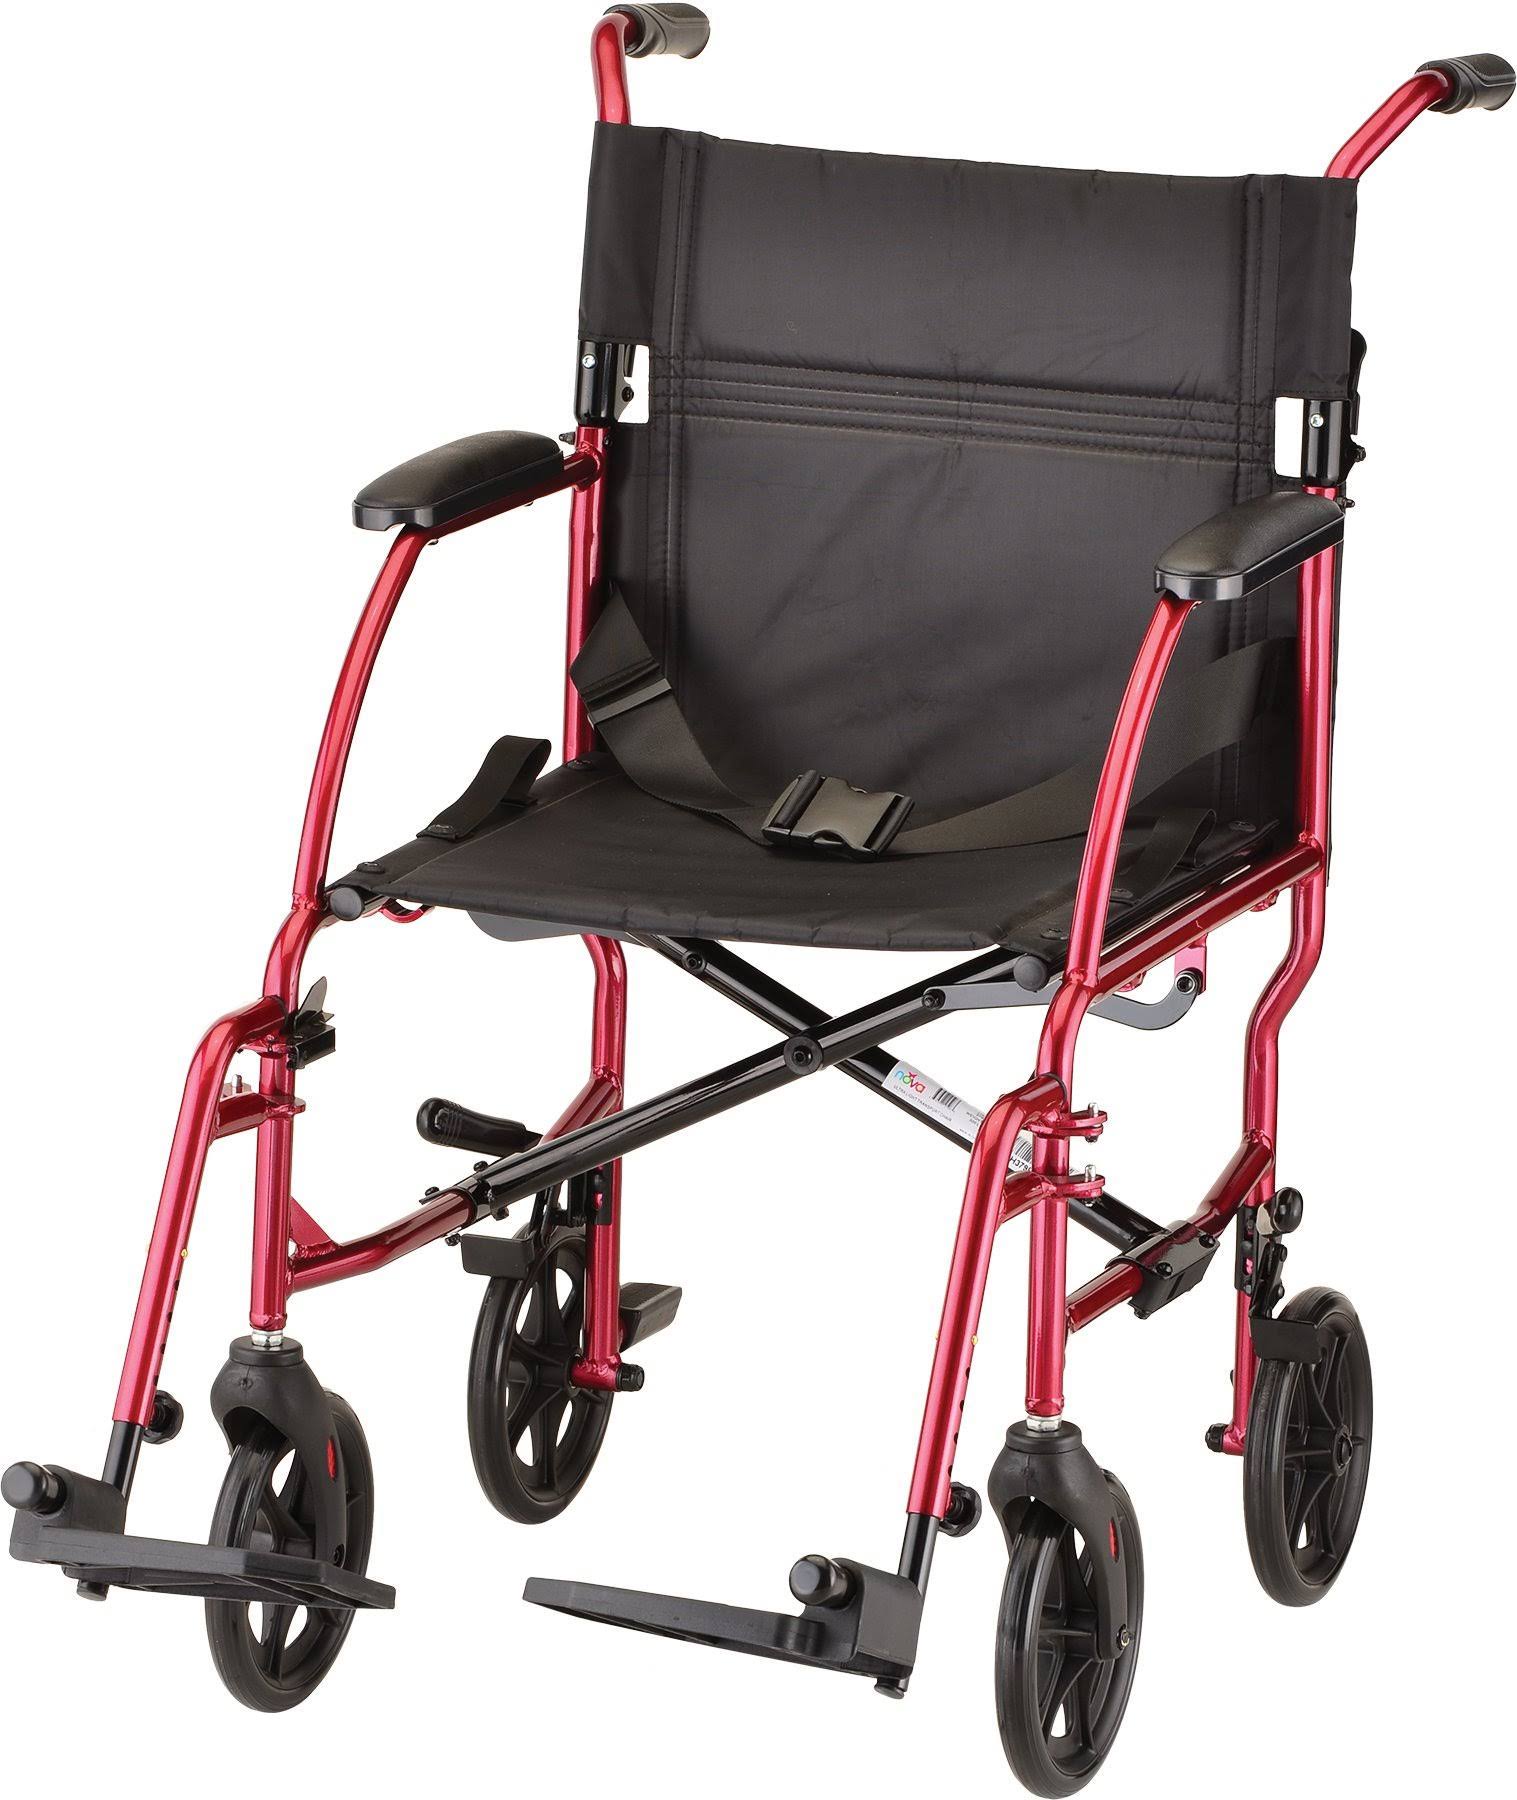 NOVA Medical Products Lightweight Transport Wheelchair - Red, 18"